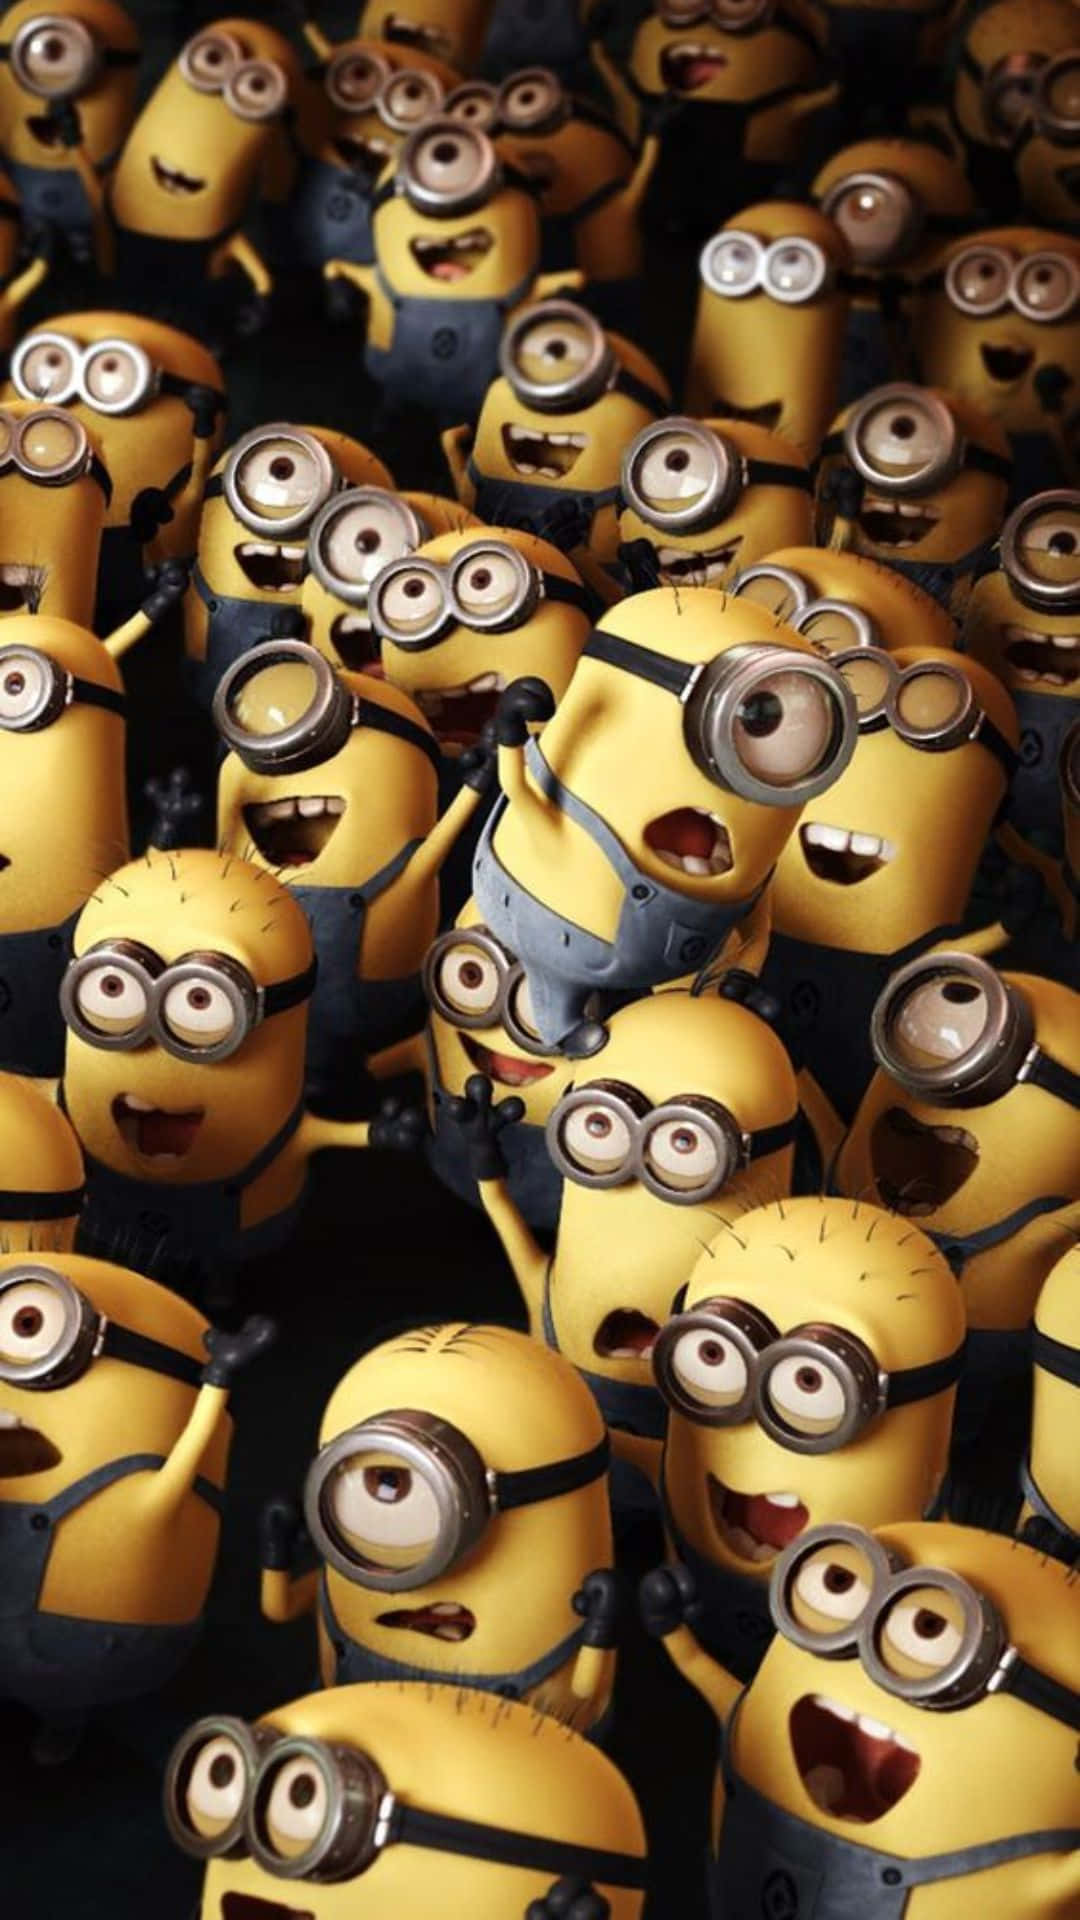 "The Minions, united in mischief and hilarity!"